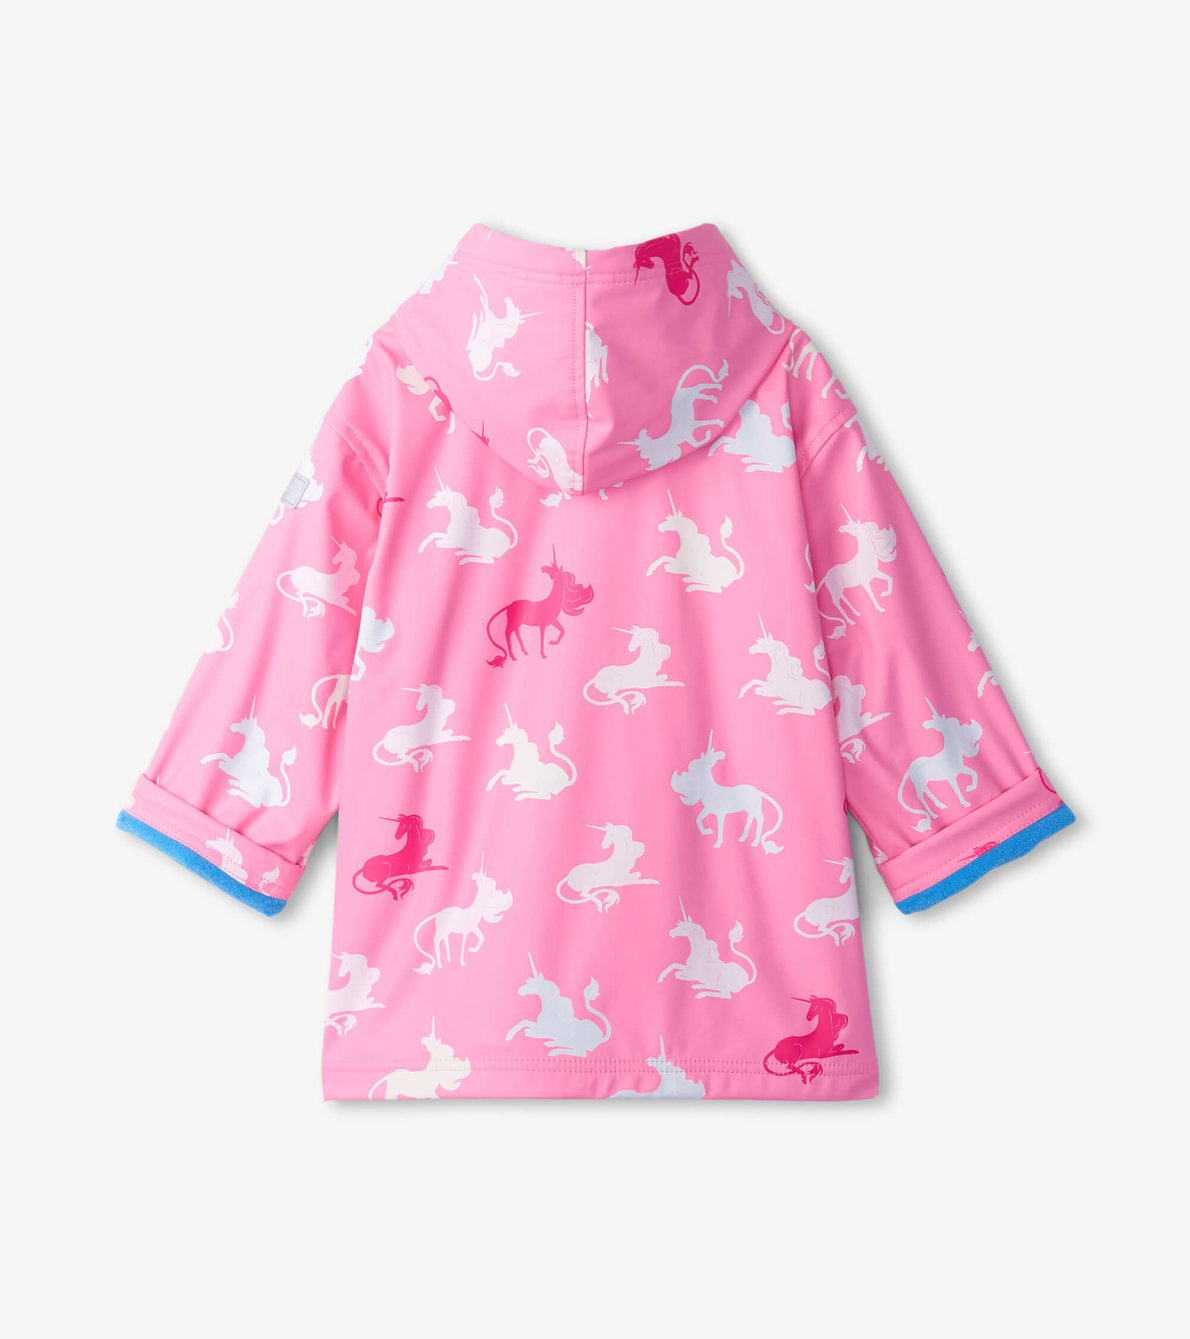 View larger image of Girls Mystical Colour Changing Zip-Up Rain Jacket